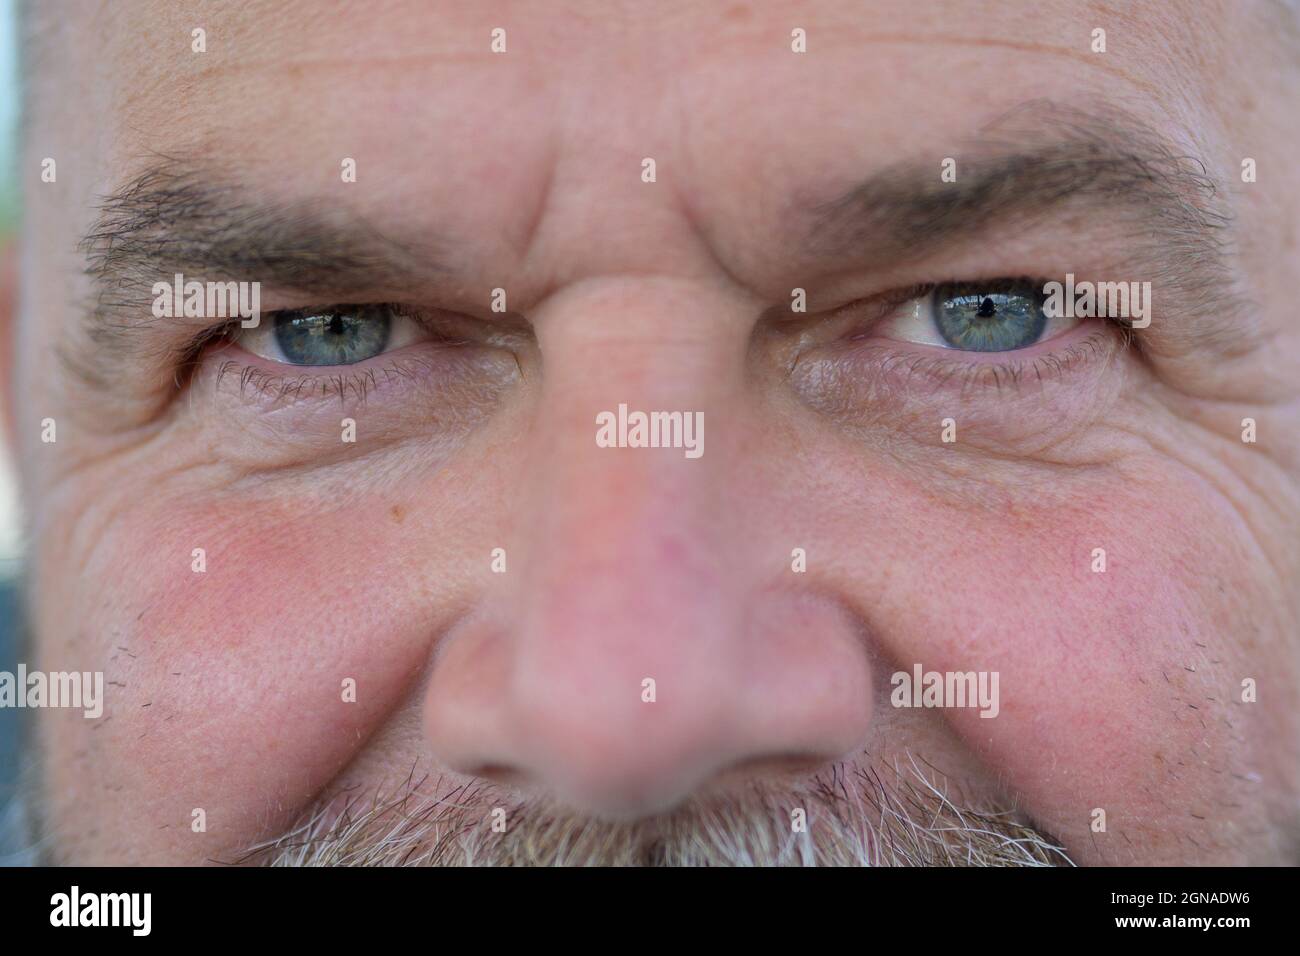 Smiling blue eyes of a happy senior man with moustache in close up detail in a cropped facial portrait as he looks into the camera Stock Photo